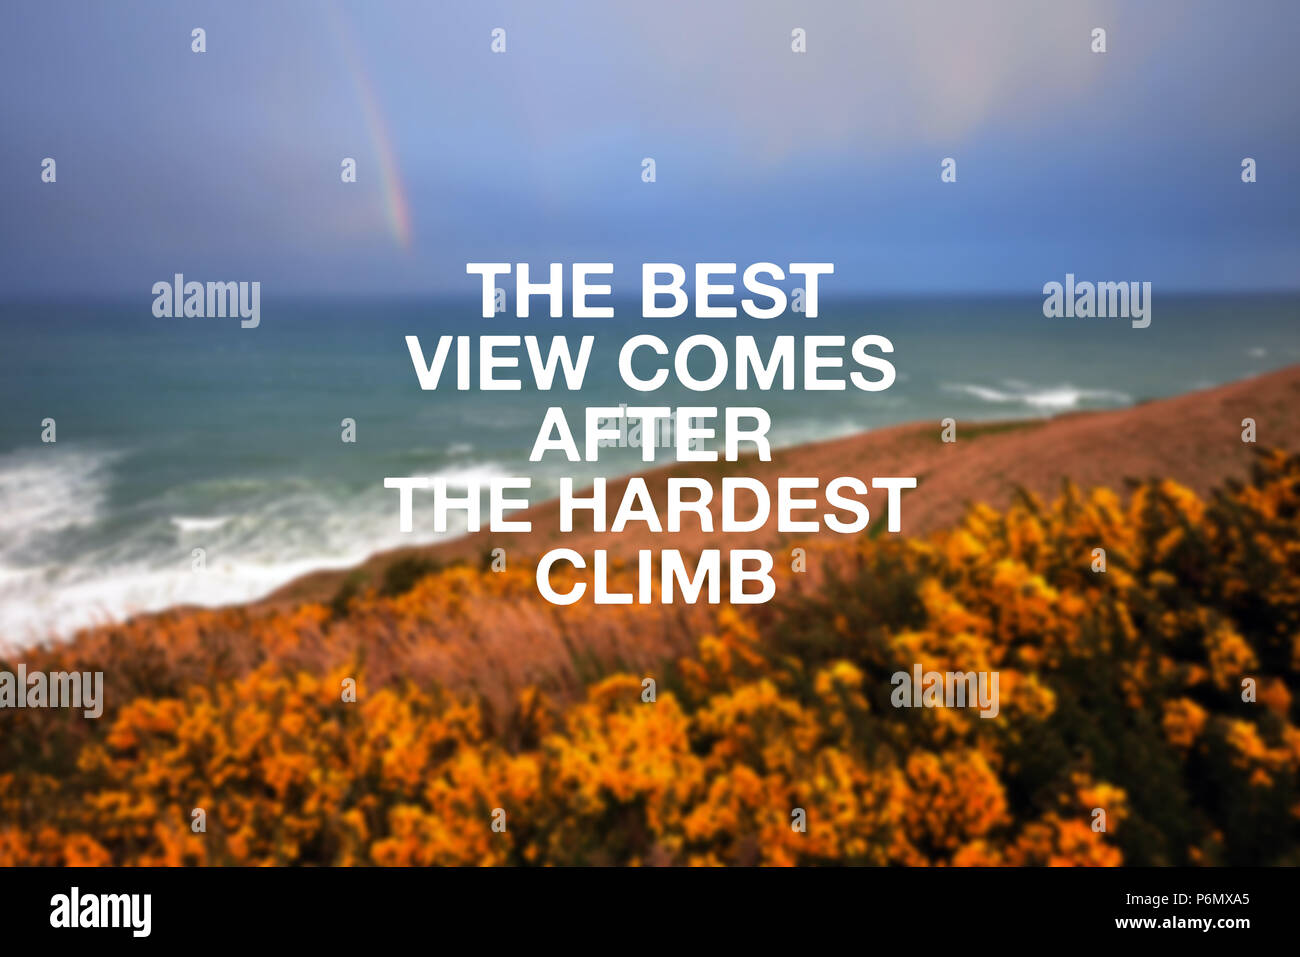 Motivational and inspirational quote - The best view comes after the hardest climb. Stock Photo